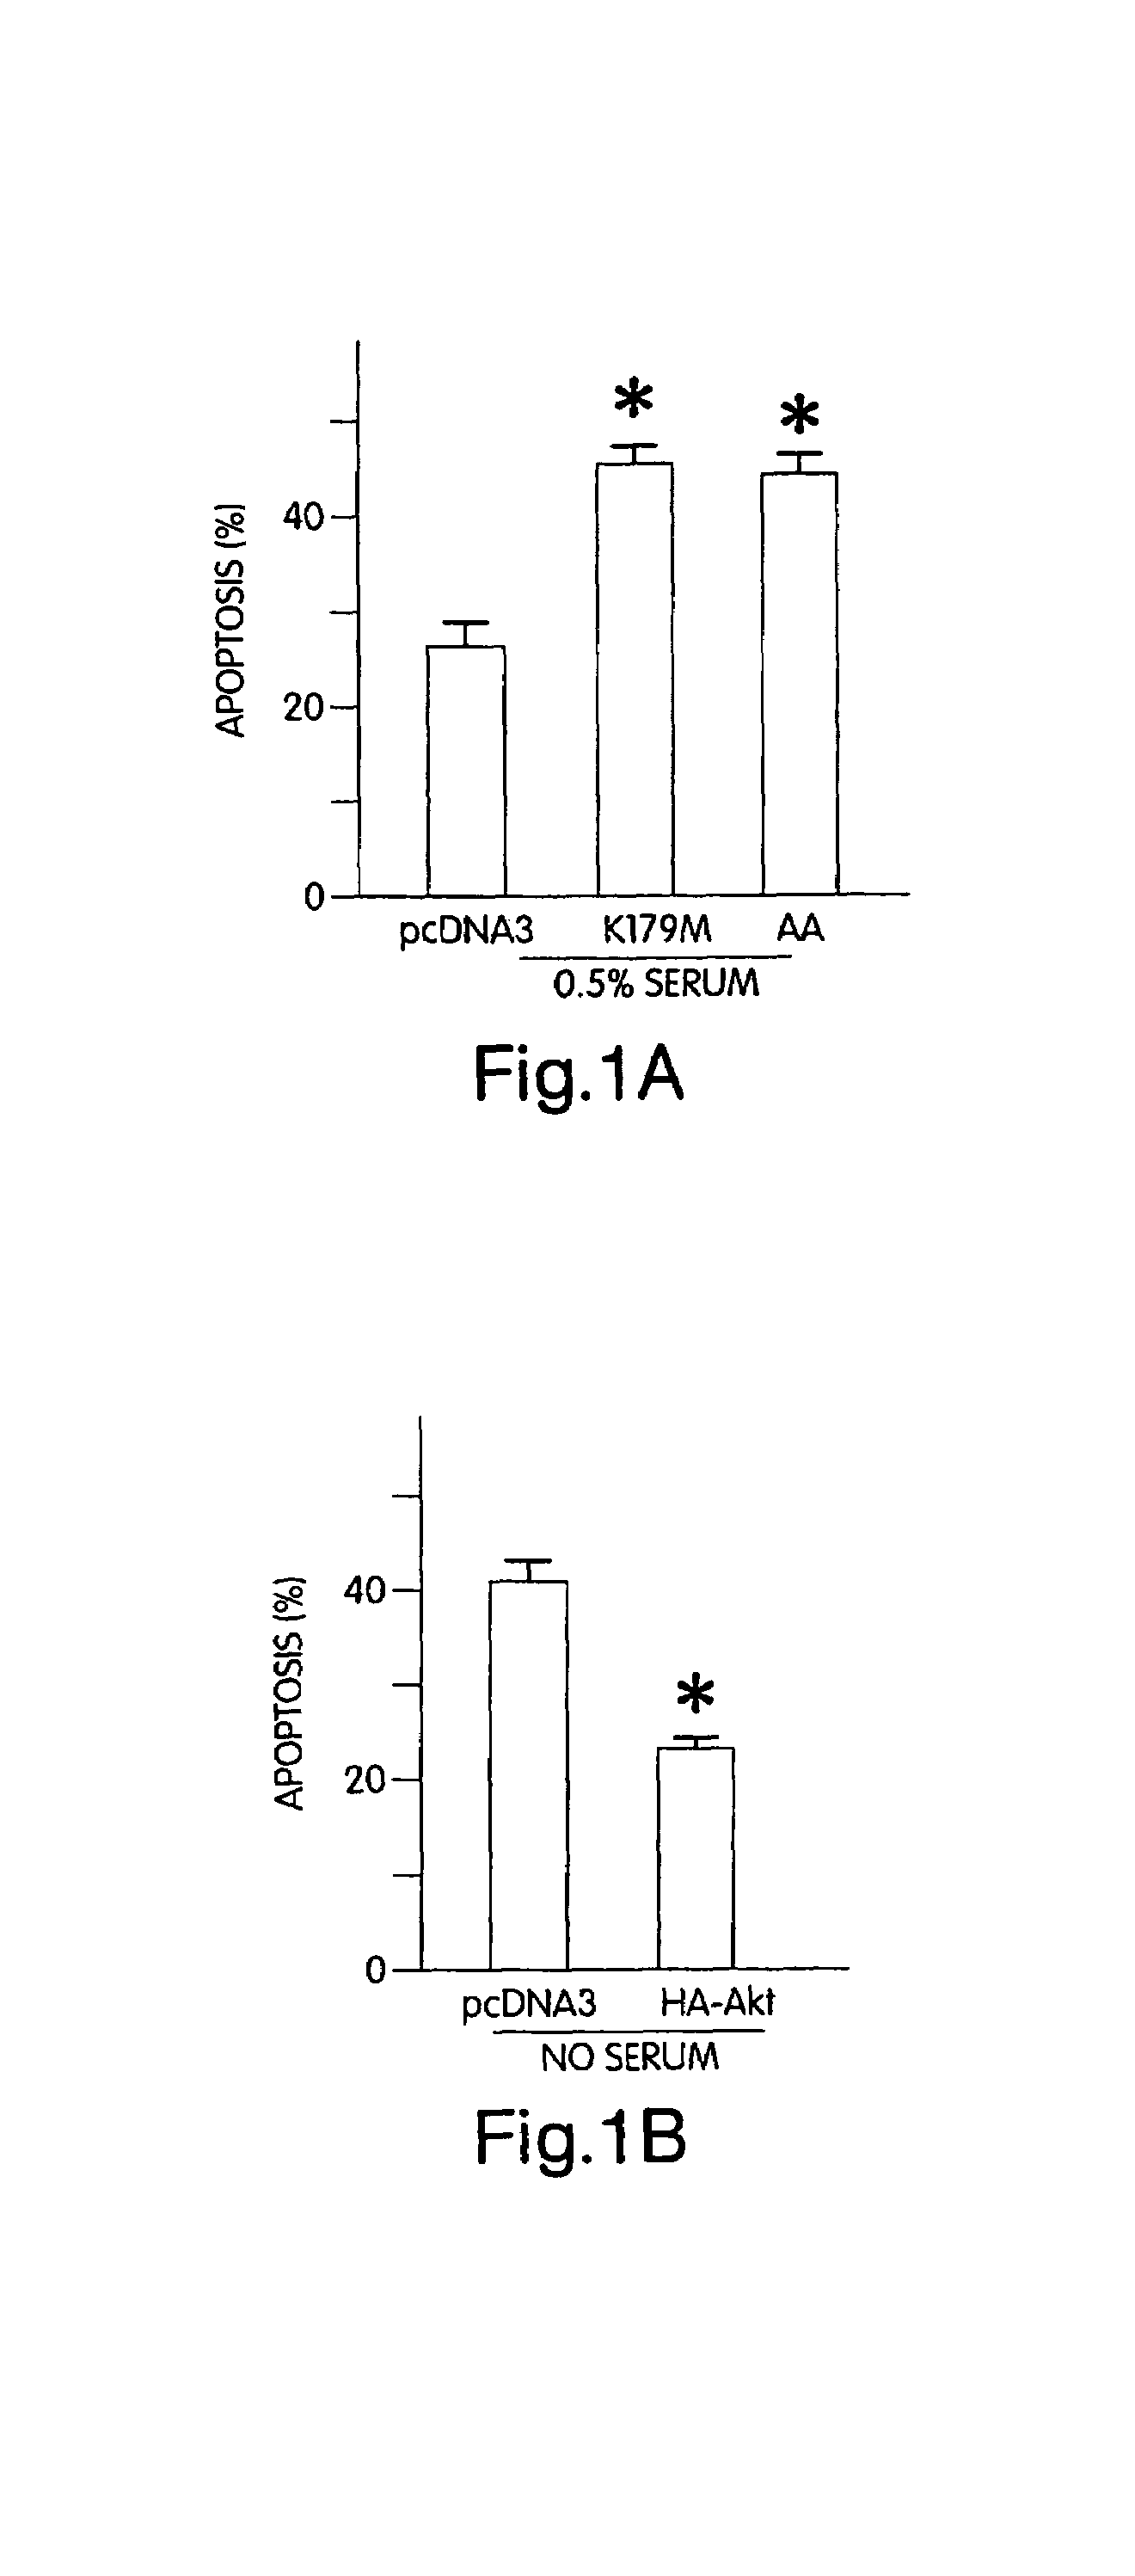 Akt compositions for enhancing survival of cells